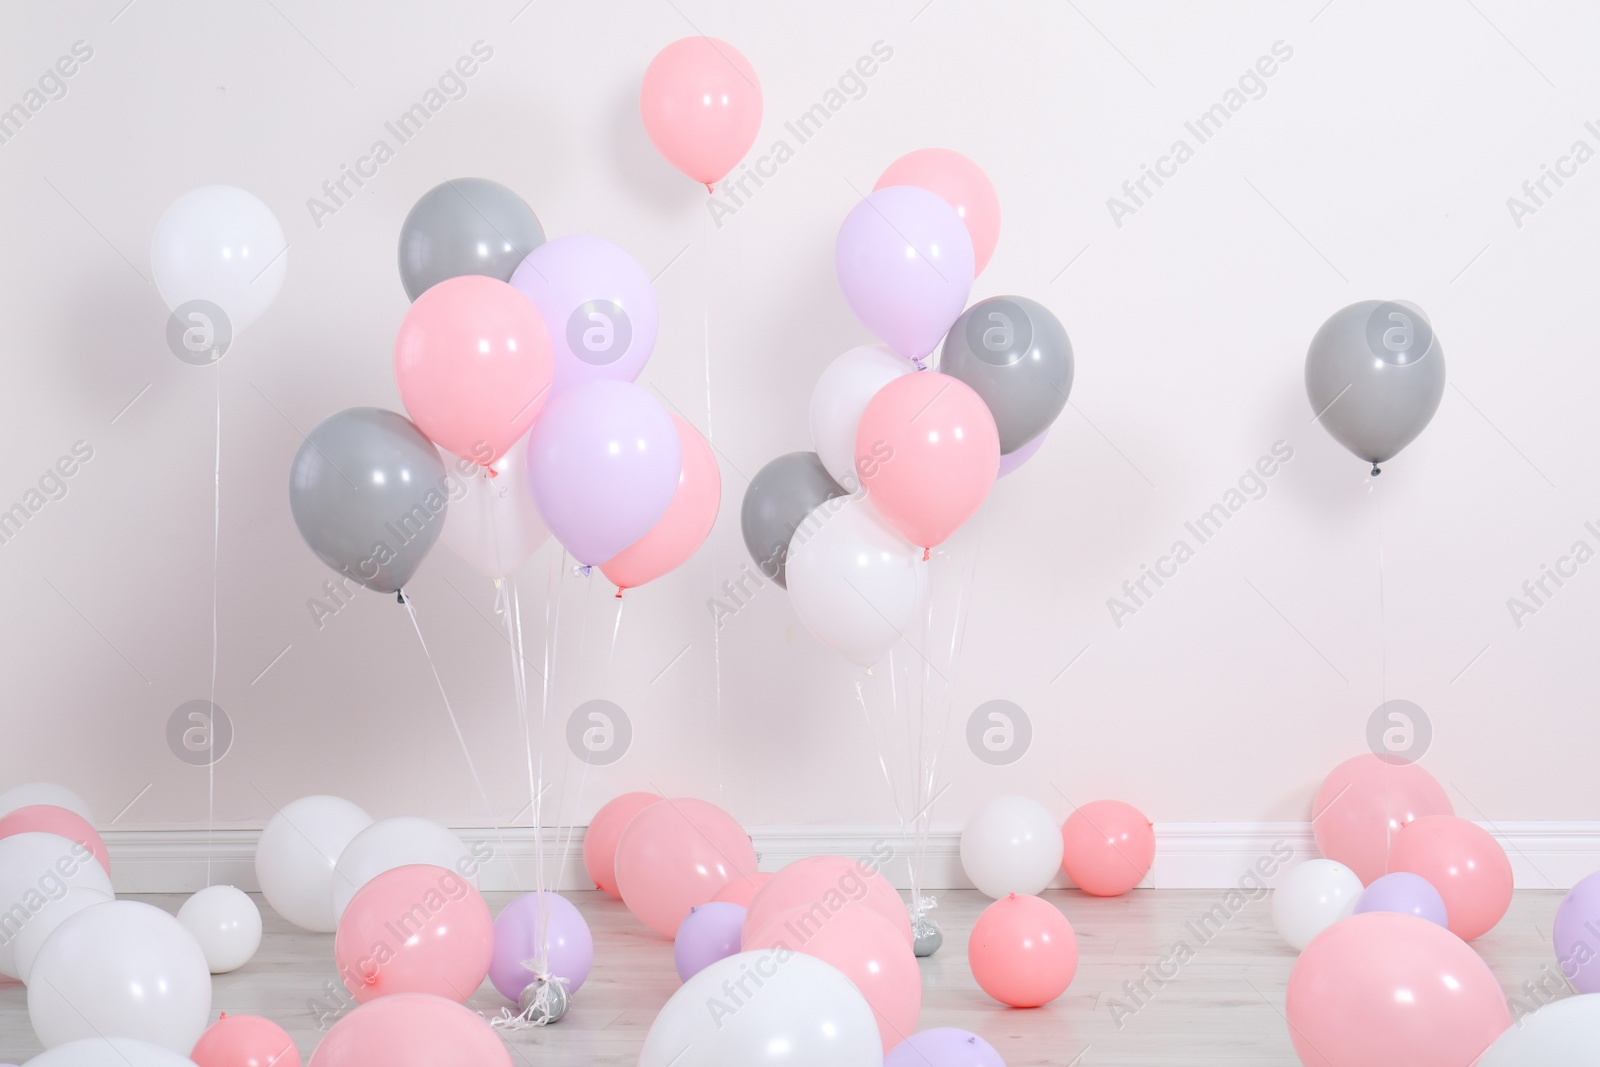 Photo of Room decorated with colorful balloons near wall